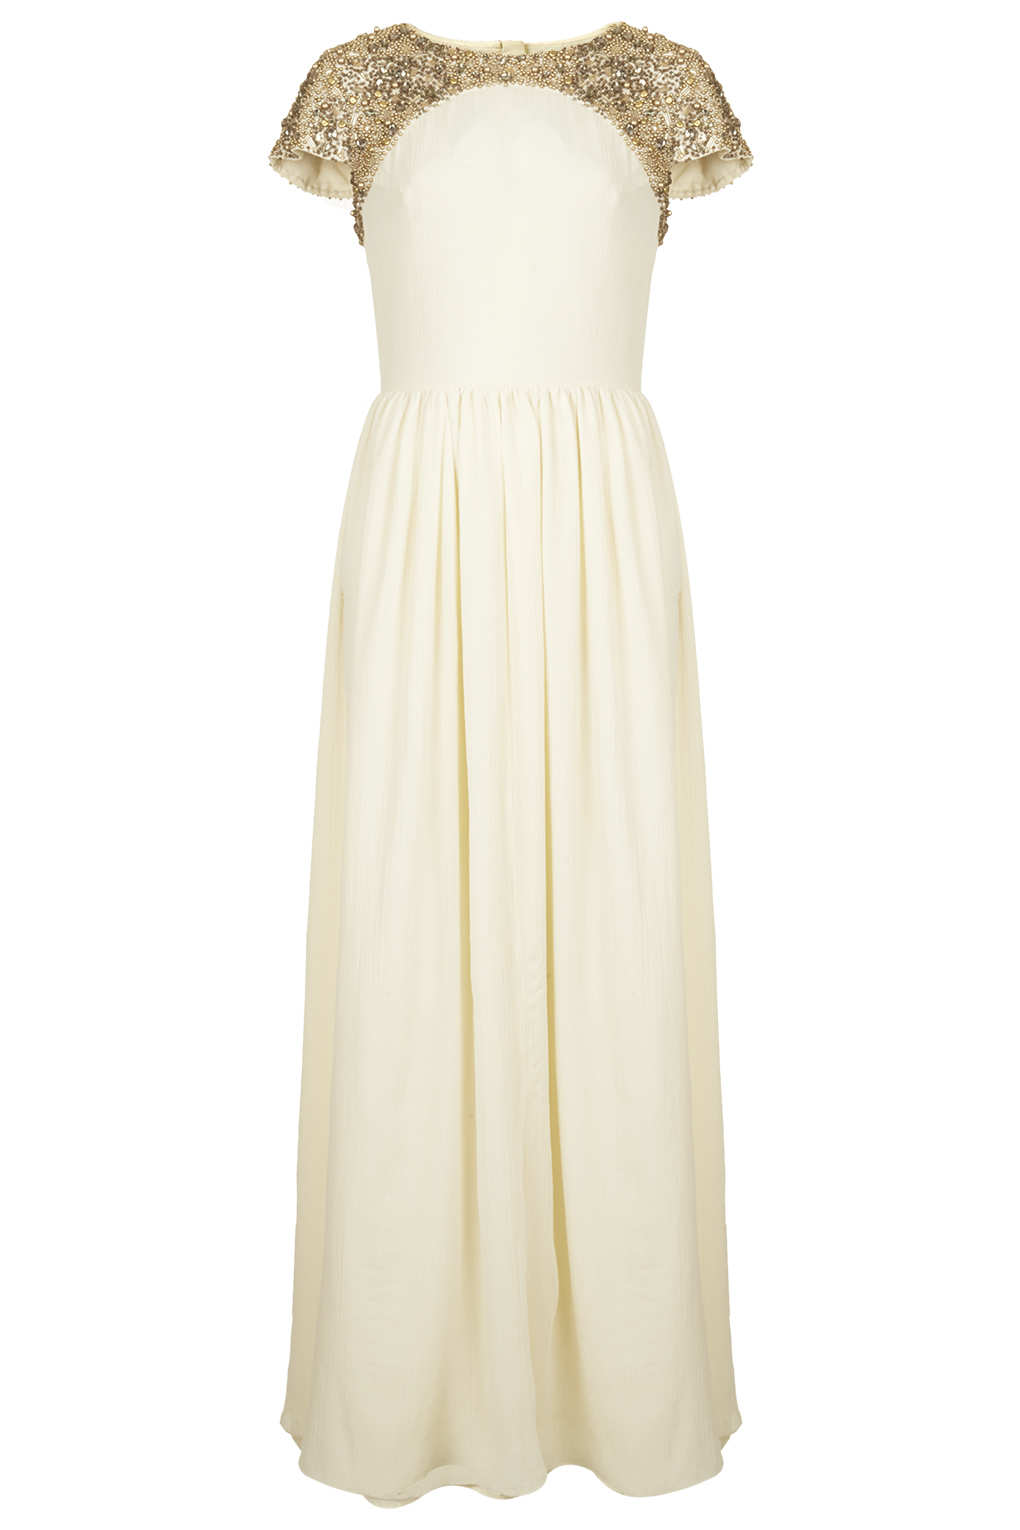 Lyst - Topshop Limited Edition Embellished Maxi Dress in Natural